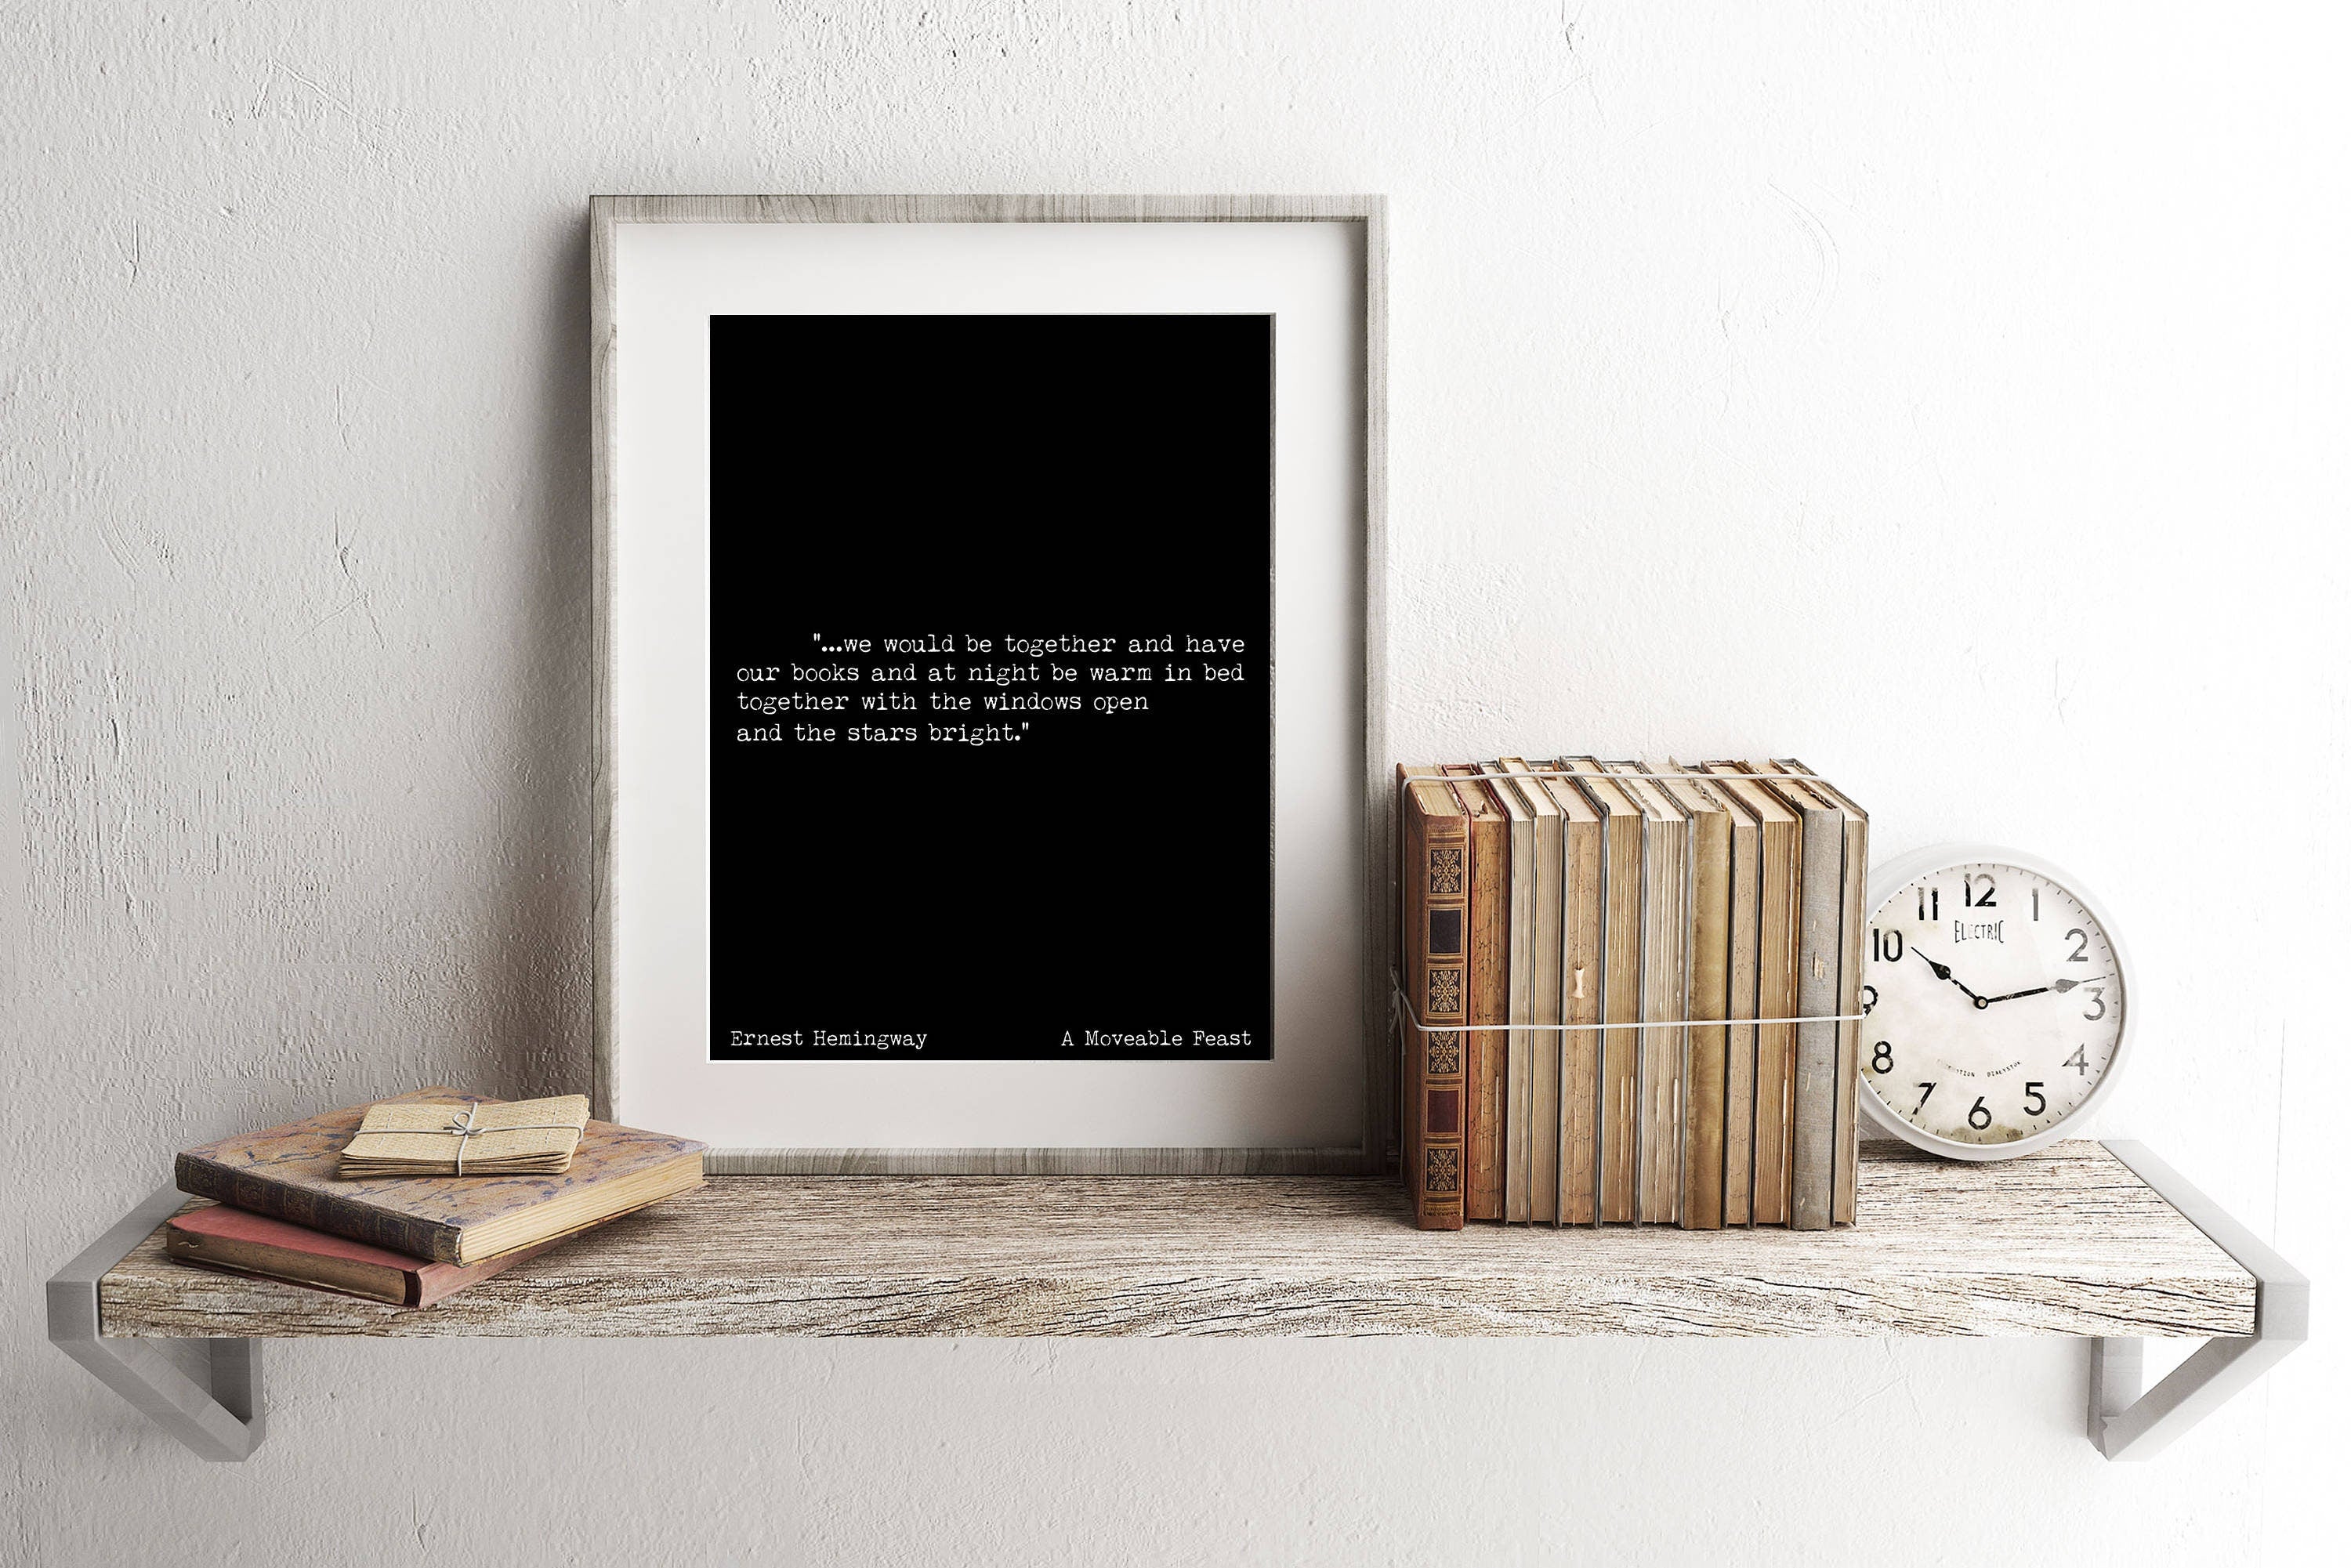 Ernest Hemingway quote print, we would be together and have our books romantic art print love quote from a moveable feast book